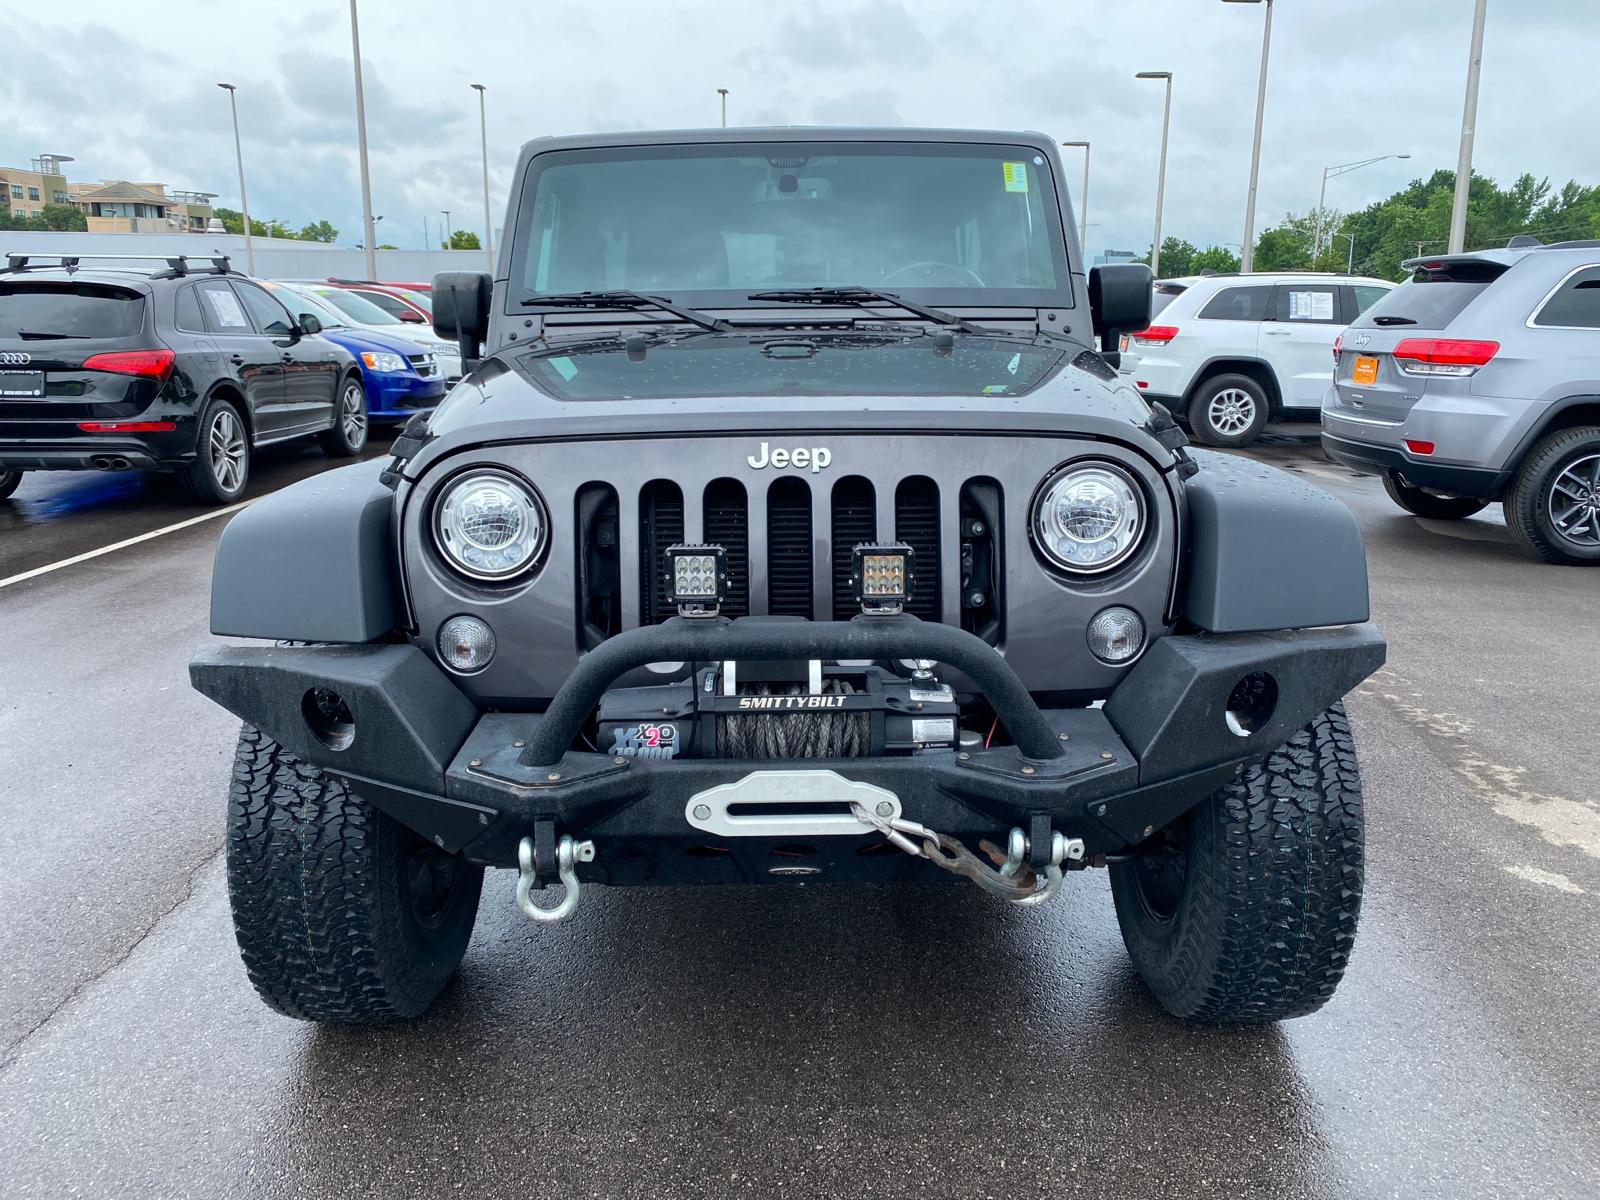 Certified PreOwned 2017 Jeep Wrangler Unlimited Rubicon 4